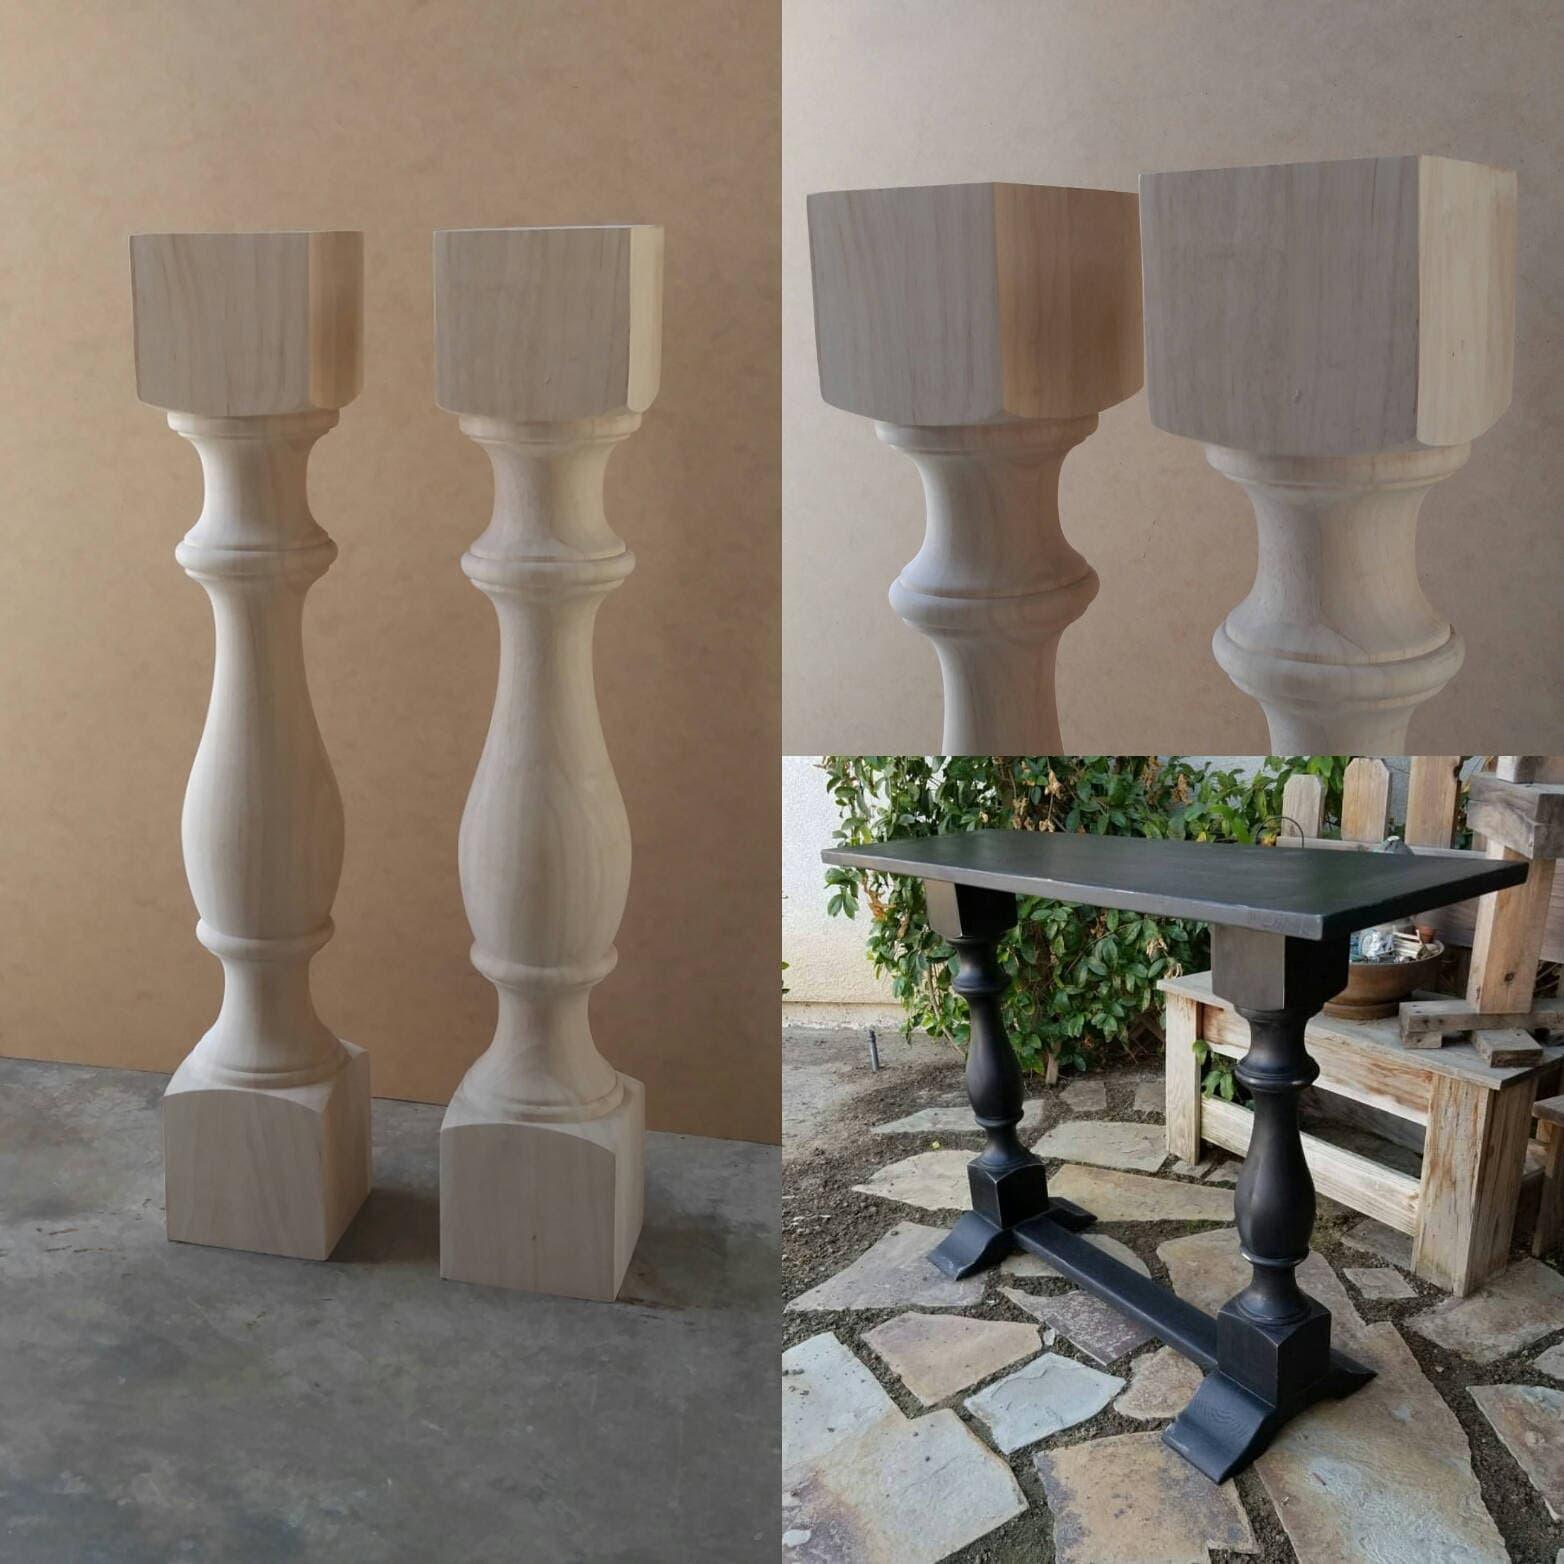 PAIR Unfinished Monastery Console Table Legs- Set of 2 Turned Posts - Design59